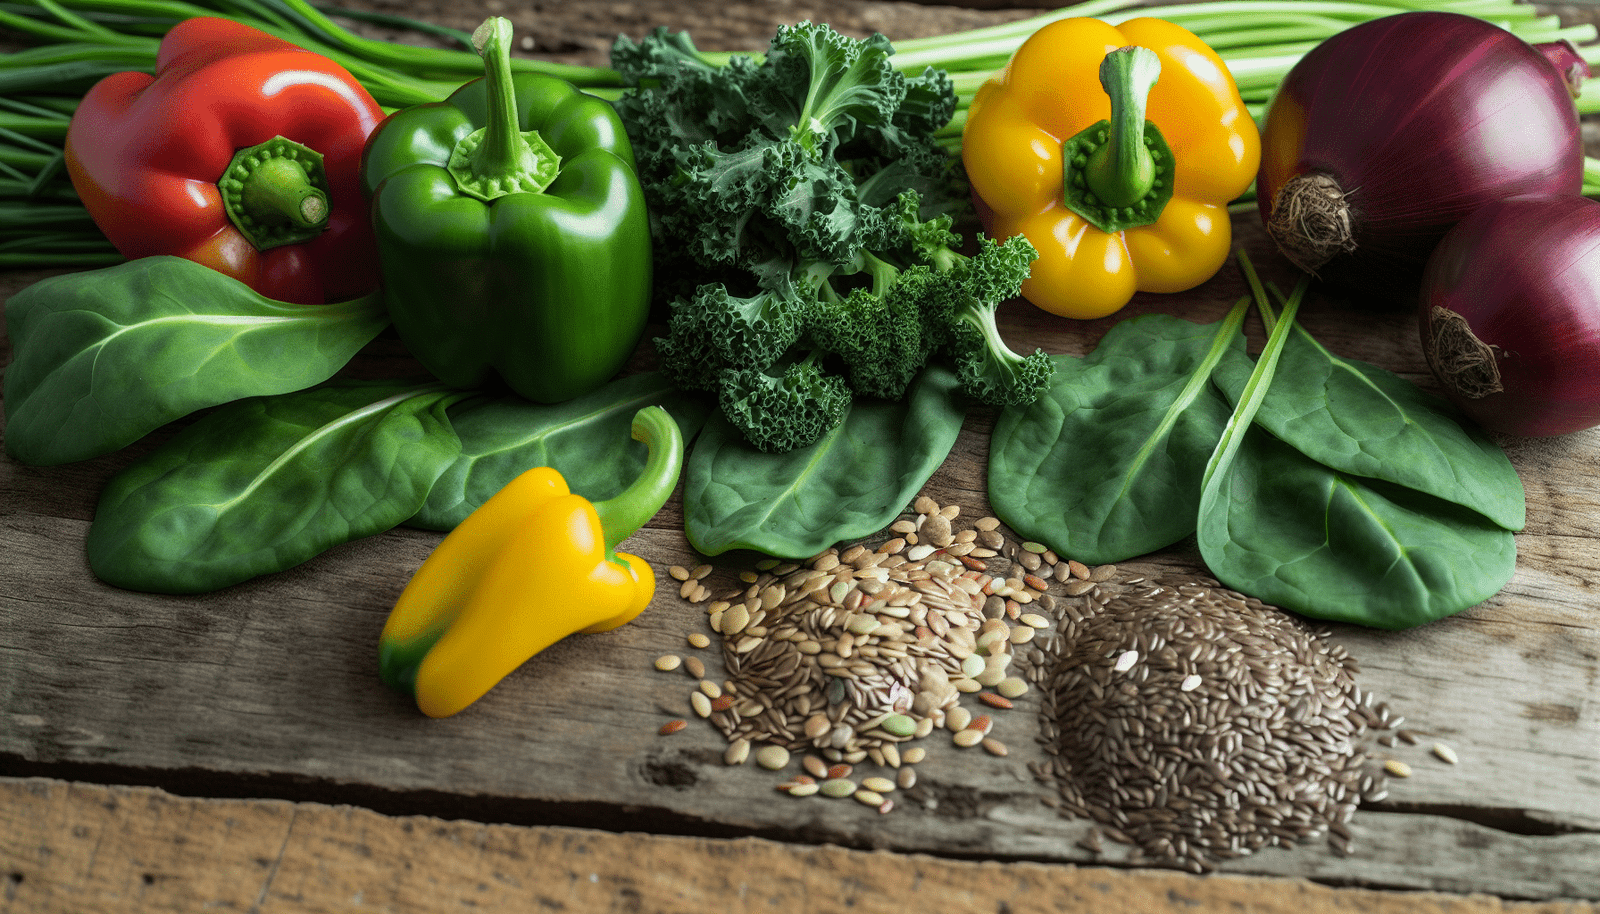 A variety of mineral-rich foods including bell peppers, leafy greens, and seeds